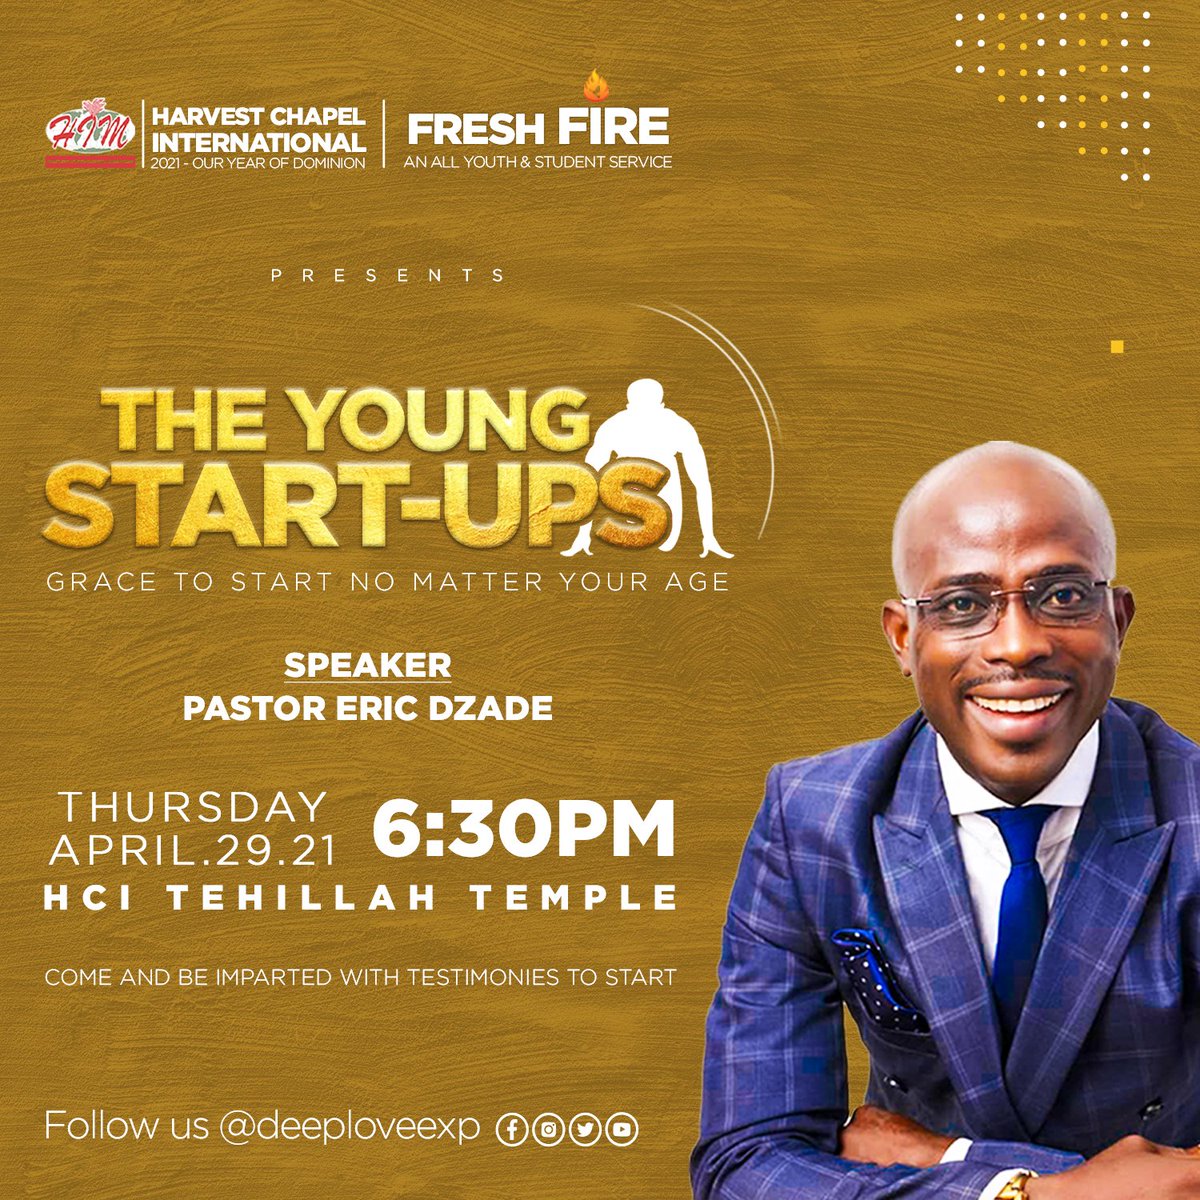 It’s the grand finale of the Young Start-Ups!

Do not miss out on the prayer and anointing session for “The Grace to Start Regardless of Age” by Rev Fitzgerald Odonkor  |  @HCITehillah  both in-person & Online
...
#YoungStartups #WealthCreation #FinancialDominion #Dominion